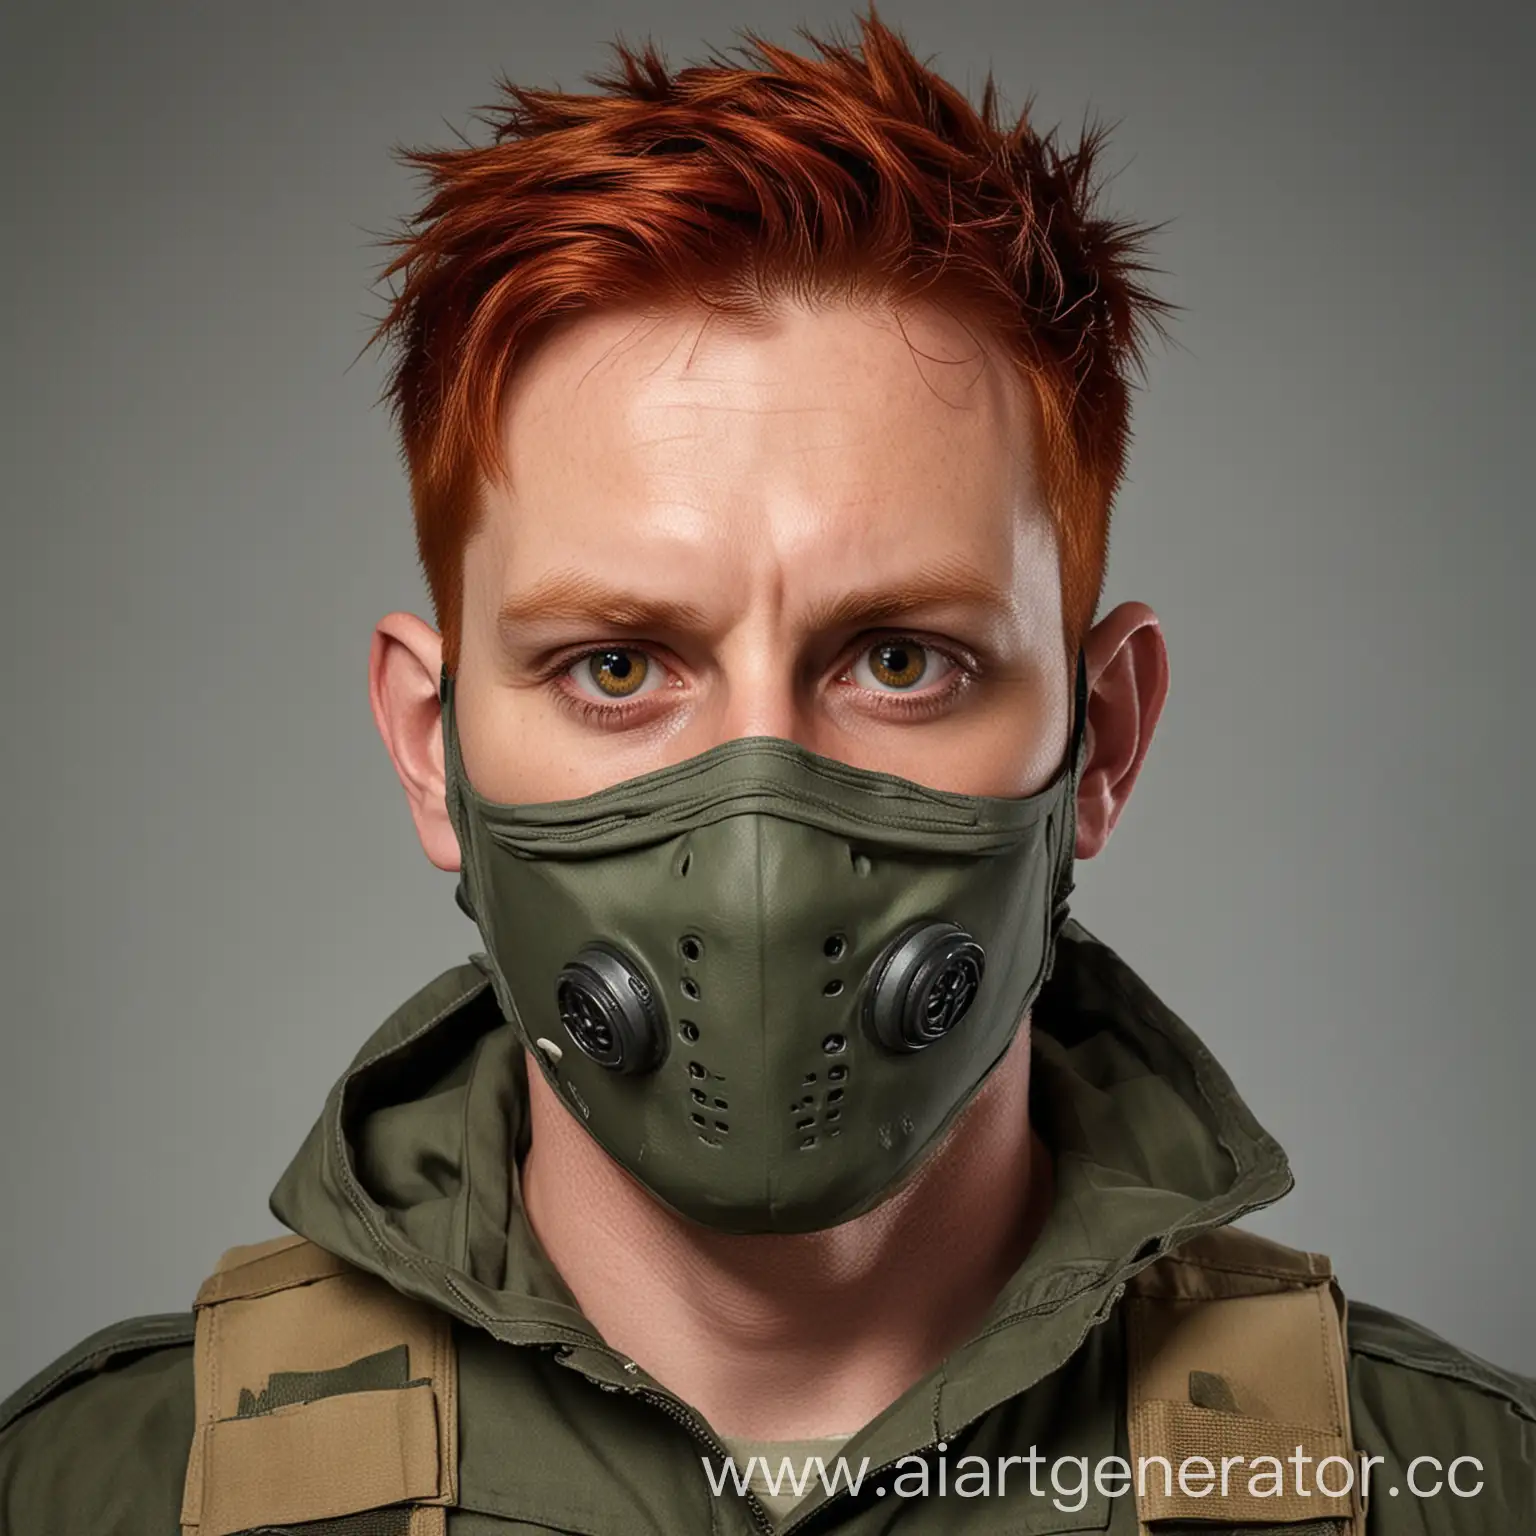 Man-with-Red-Hair-Wearing-Military-Mask-and-Intense-Eyes